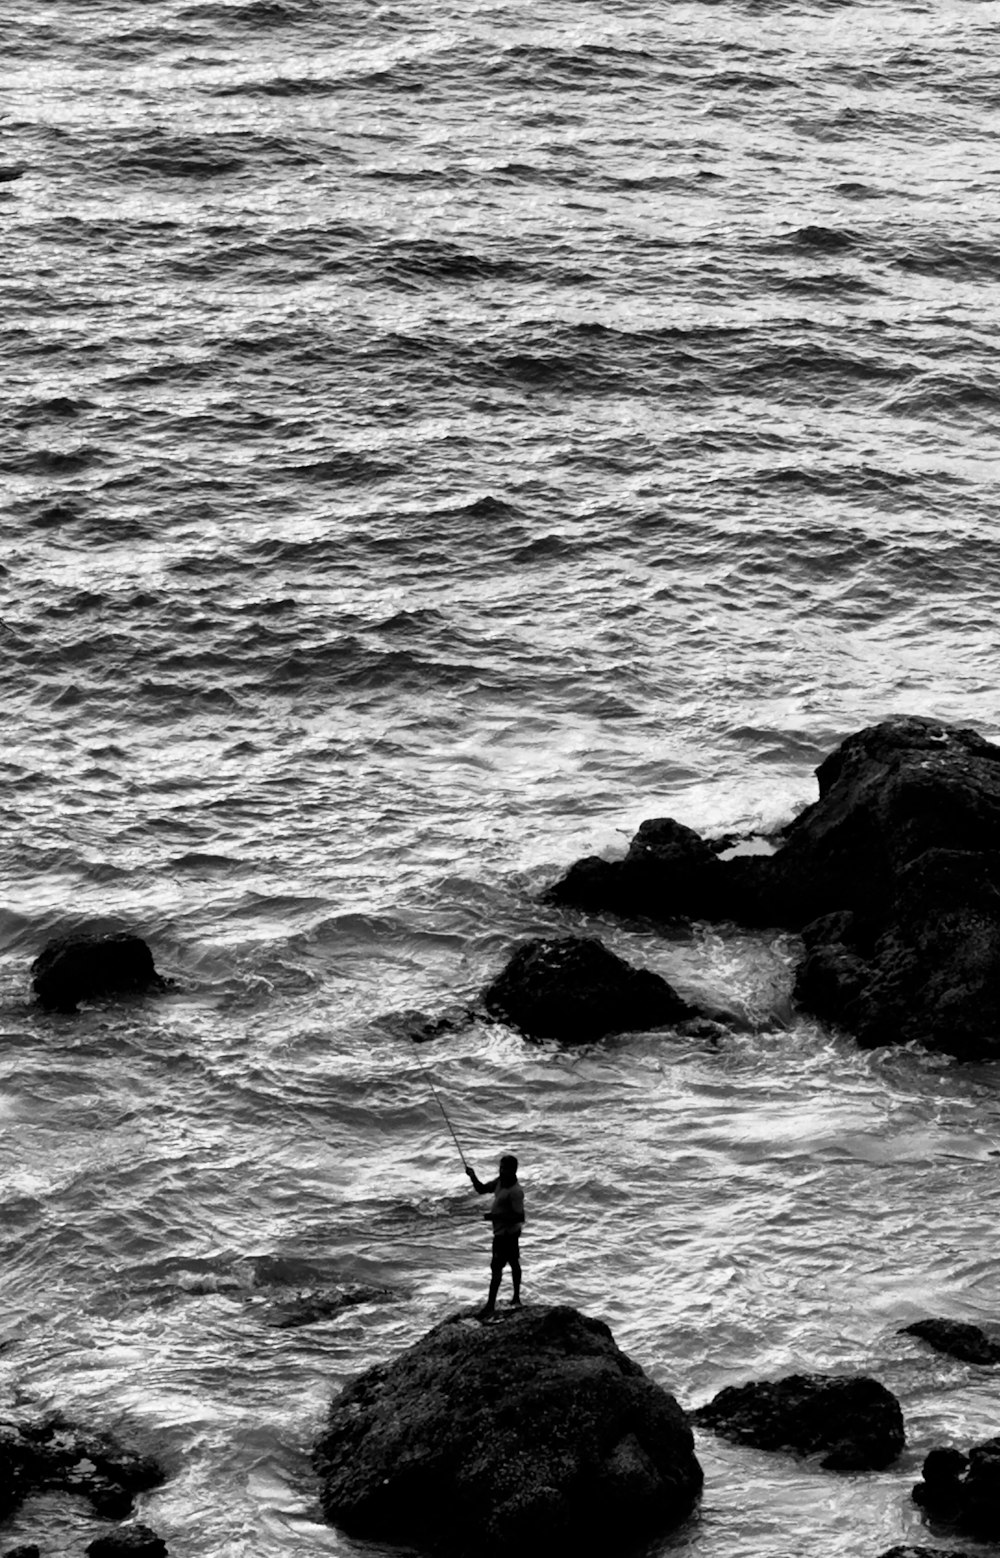 a person standing on a rock in the ocean